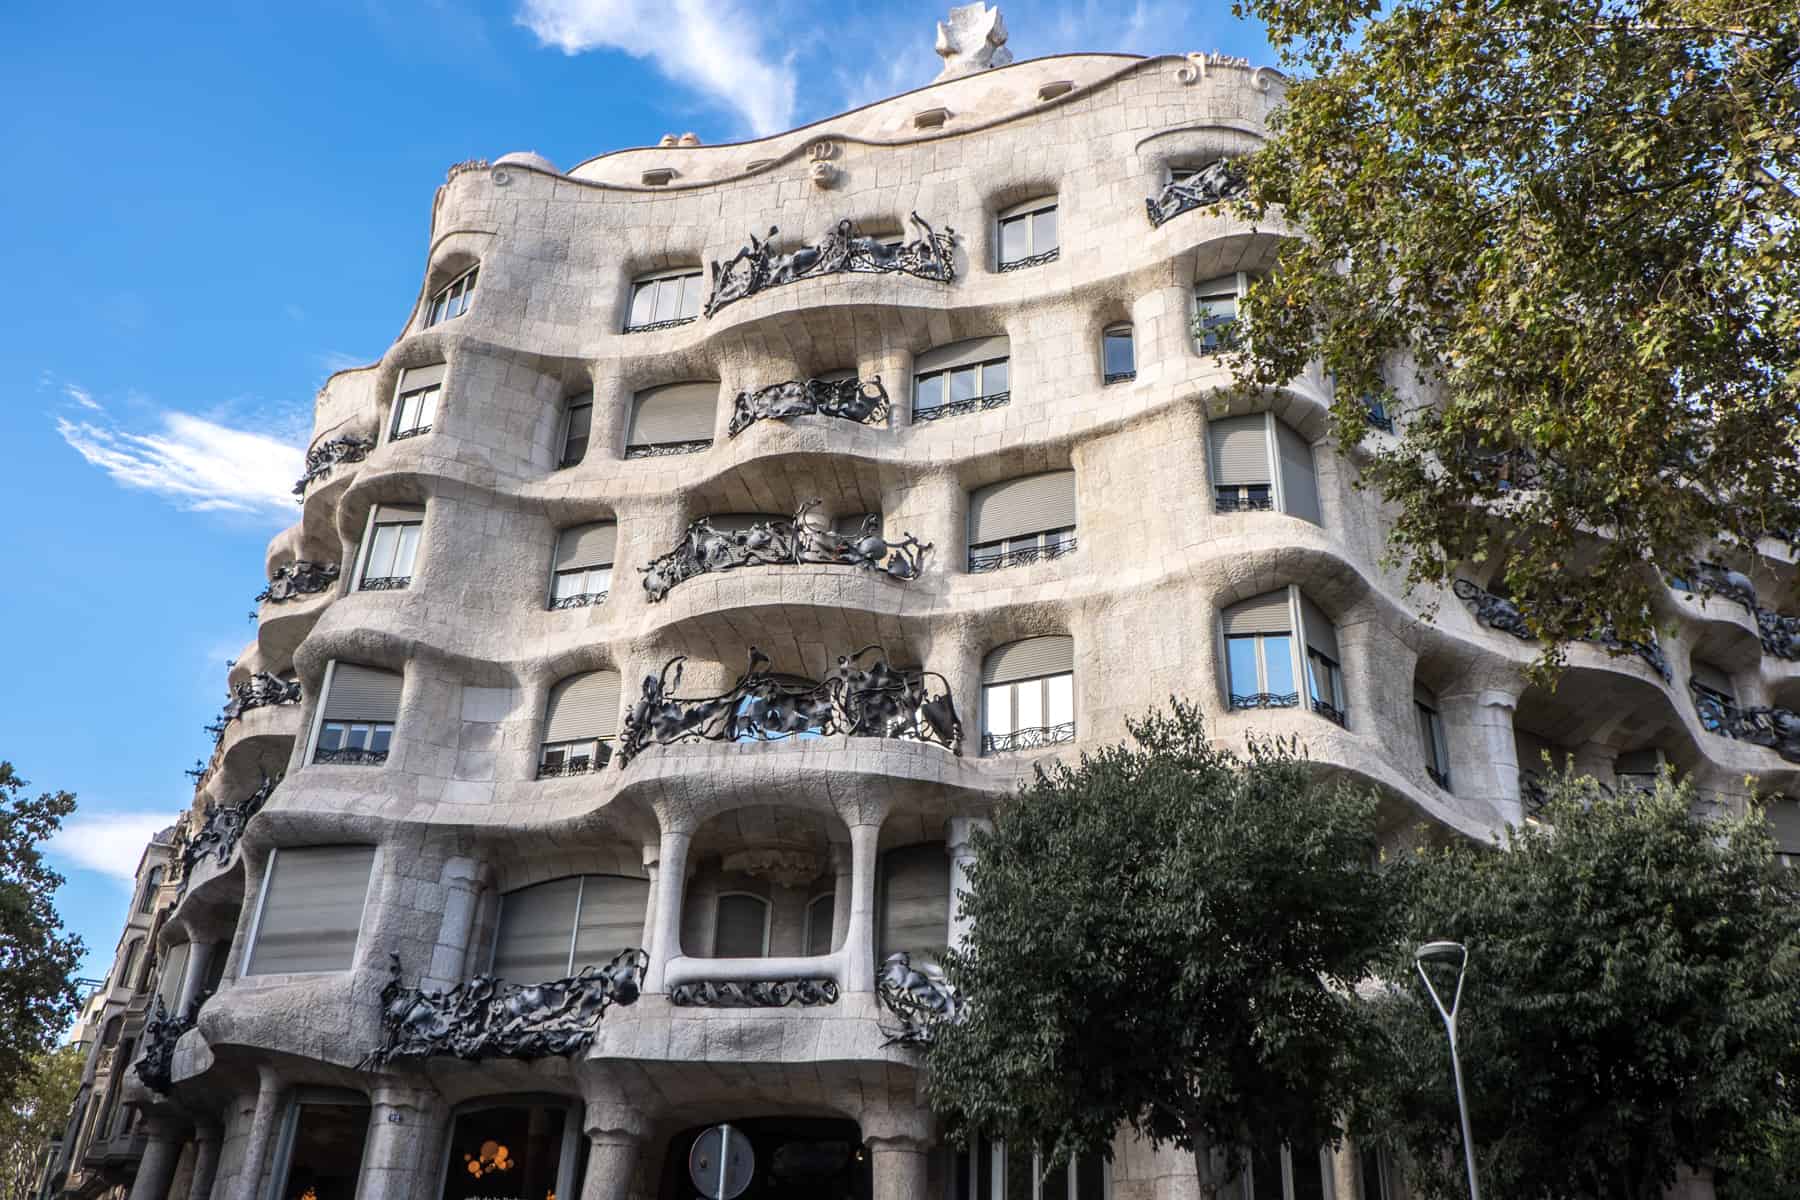 The egg-white coloured , curved floors and balconies of Gaudi's famed Casa Mila in Barcelona, as seen from the street. 